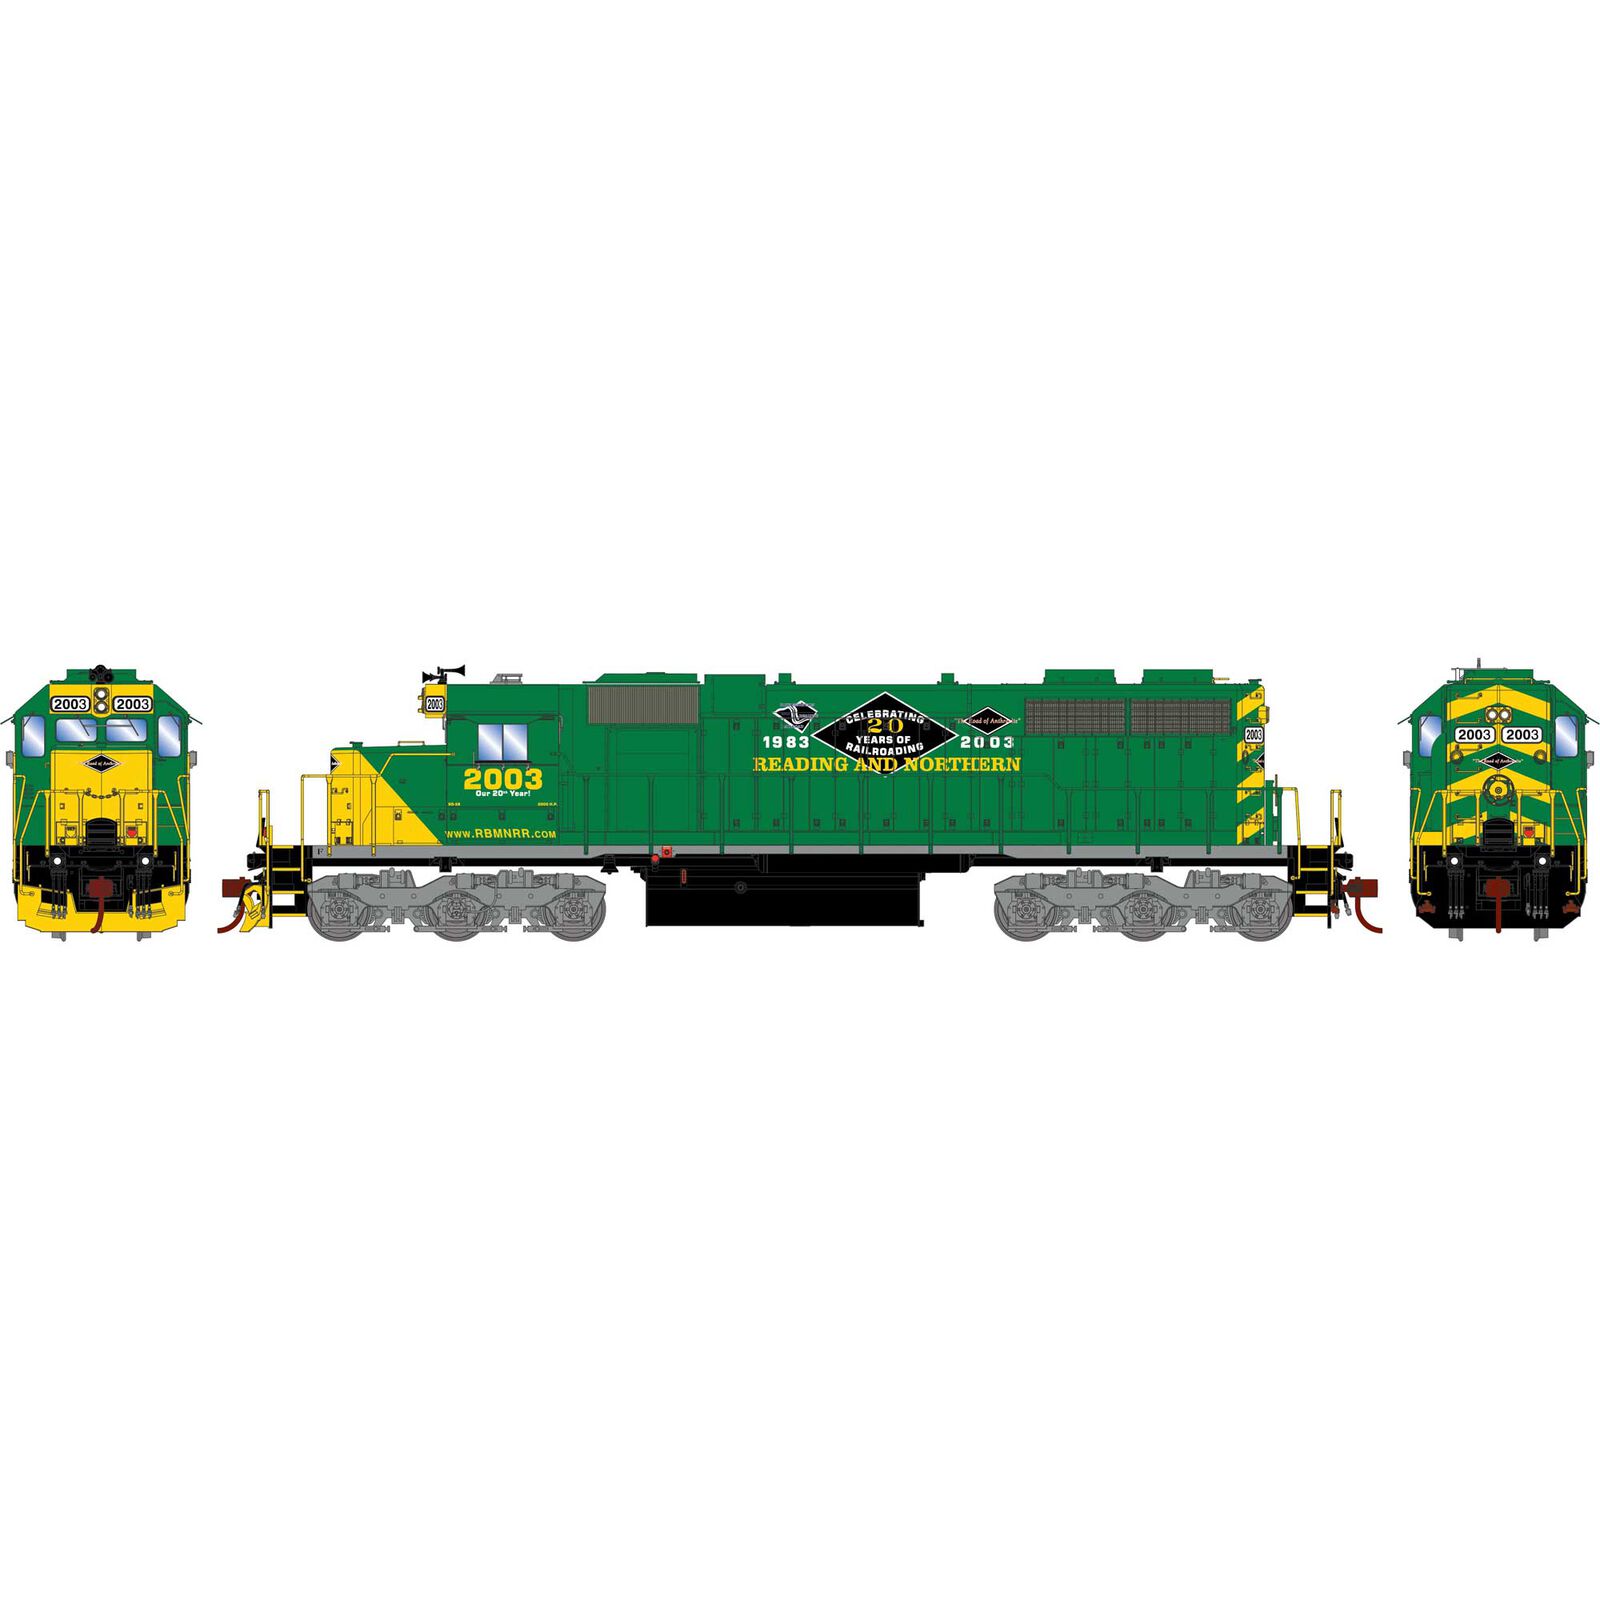 HO RTR SD38 with DCC & Sound, RBMN #2003